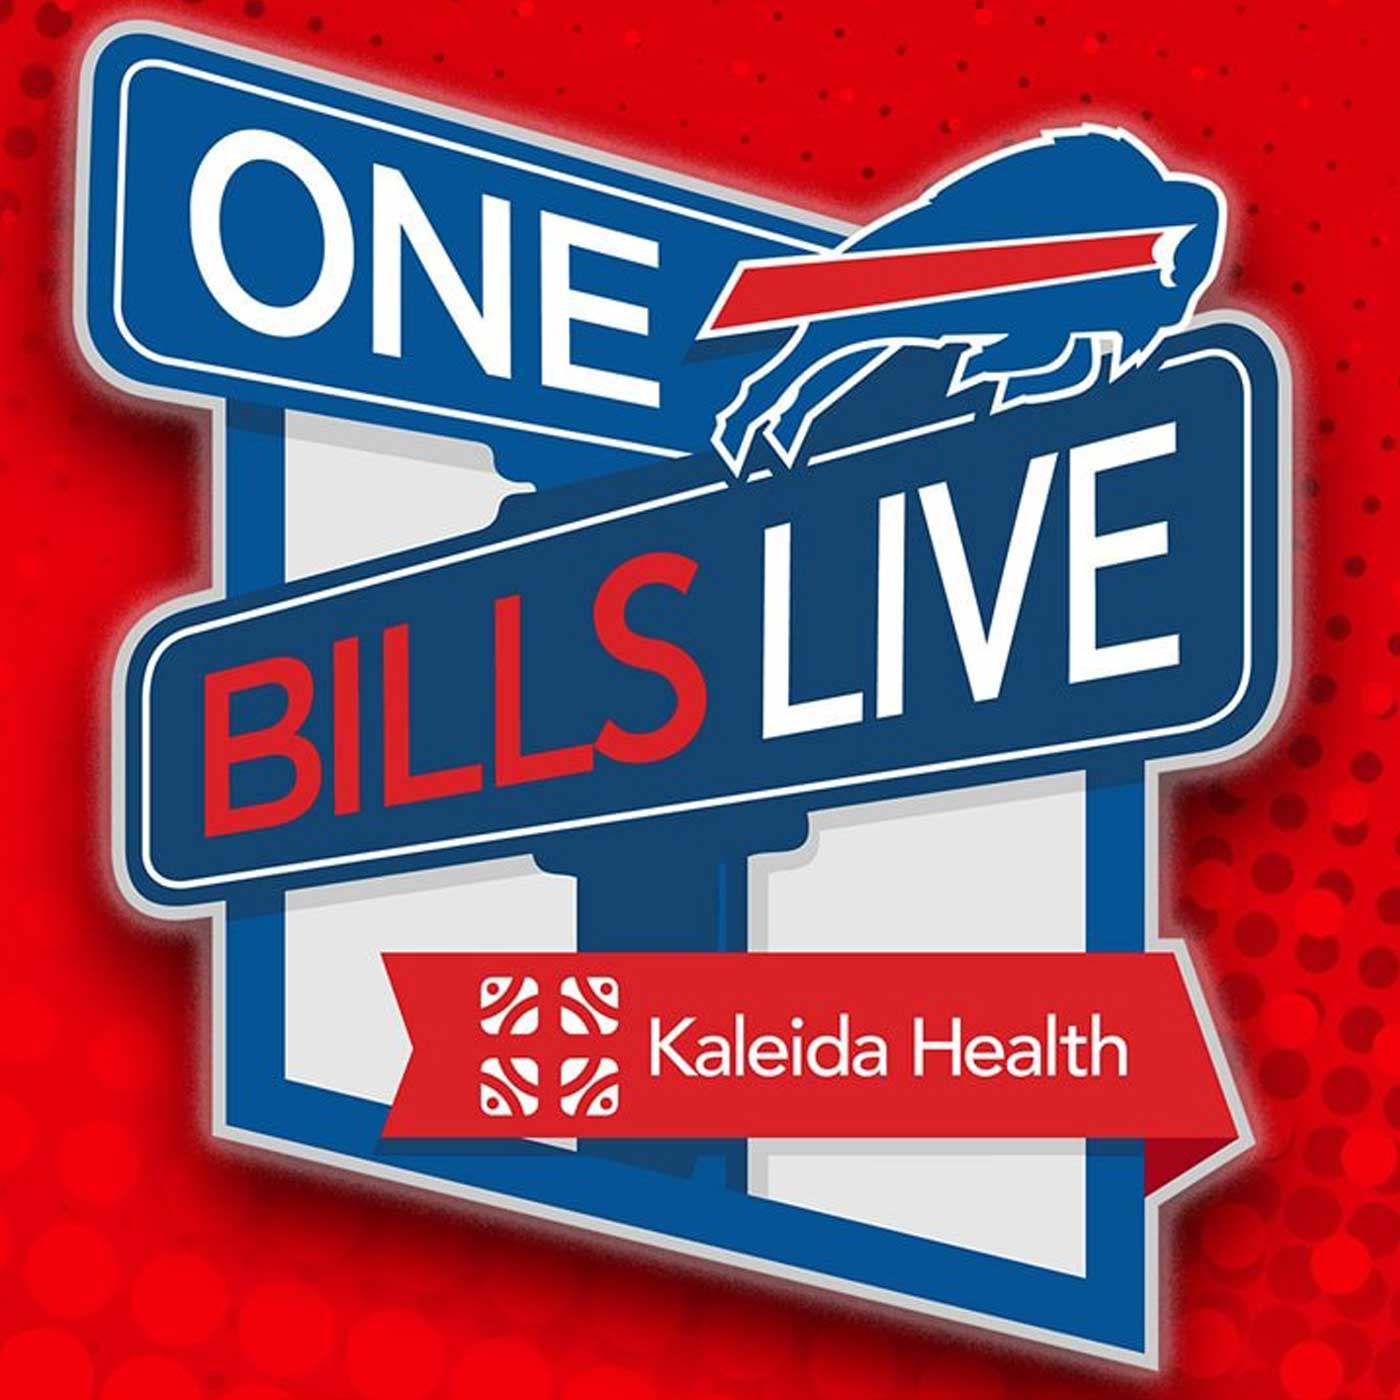 OBL 12/18: Ted Washington on his dominance on the D-line; Keith Ford discusses his unique path to the NFL; Bucky Brooks shares his praise for Bills QB Josh Allen